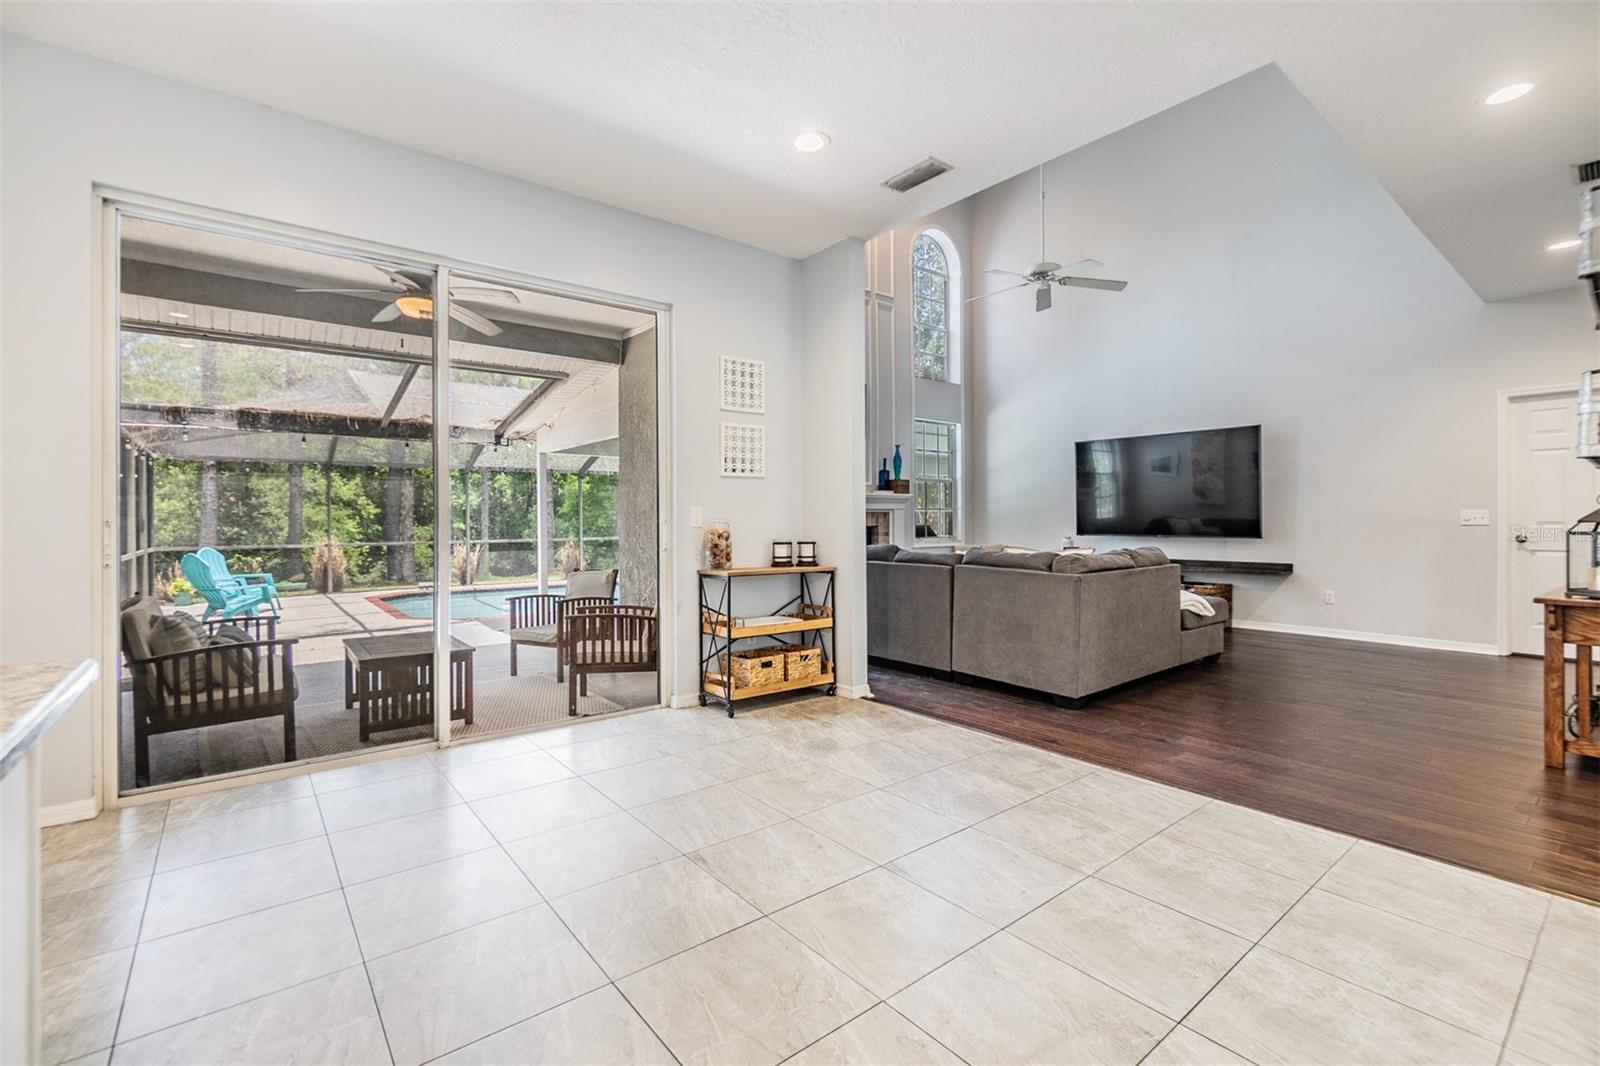 Open space for a Kitchen table that leads into the Family Room, with views of the pool.